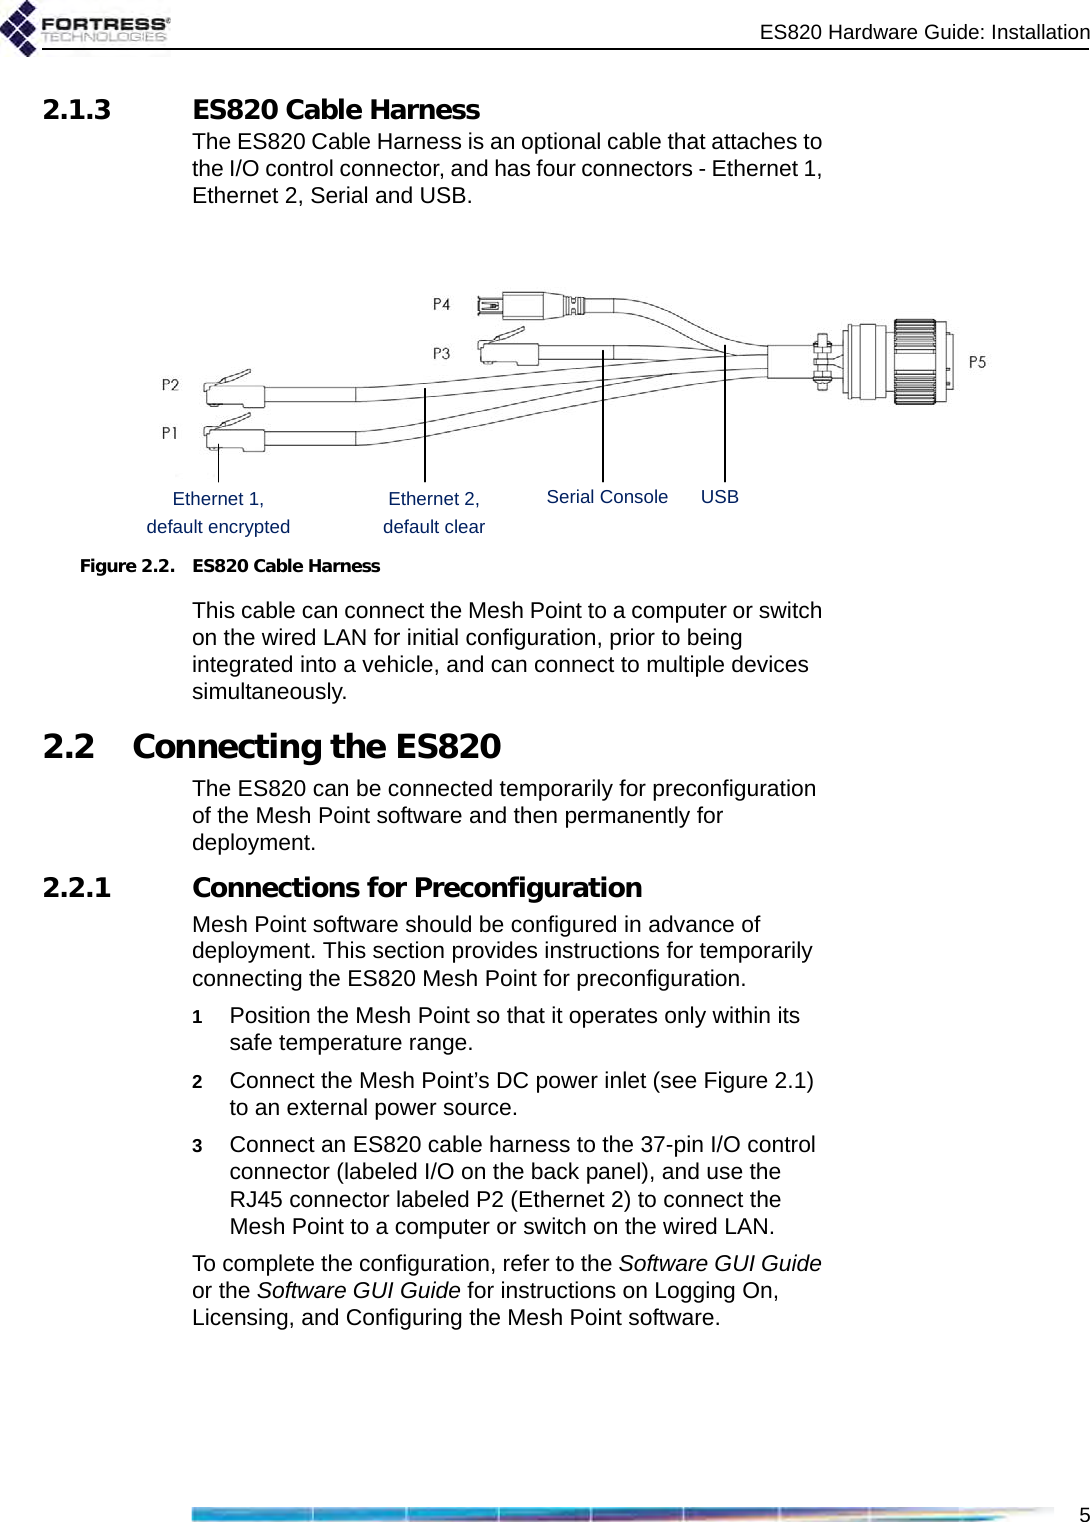 ES820 Hardware Guide: Installation52.1.3 ES820 Cable HarnessThe ES820 Cable Harness is an optional cable that attaches to the I/O control connector, and has four connectors - Ethernet 1, Ethernet 2, Serial and USB. Figure 2.2. ES820 Cable HarnessThis cable can connect the Mesh Point to a computer or switch on the wired LAN for initial configuration, prior to being integrated into a vehicle, and can connect to multiple devices simultaneously. 2.2 Connecting the ES820The ES820 can be connected temporarily for preconfiguration of the Mesh Point software and then permanently for deployment.2.2.1 Connections for PreconfigurationMesh Point software should be configured in advance of deployment. This section provides instructions for temporarily connecting the ES820 Mesh Point for preconfiguration.1Position the Mesh Point so that it operates only within its safe temperature range.2Connect the Mesh Point’s DC power inlet (see Figure 2.1) to an external power source.3Connect an ES820 cable harness to the 37-pin I/O control connector (labeled I/O on the back panel), and use the RJ45 connector labeled P2 (Ethernet 2) to connect the Mesh Point to a computer or switch on the wired LAN. To complete the configuration, refer to the Software GUI Guide or the Software GUI Guide for instructions on Logging On, Licensing, and Configuring the Mesh Point software.Ethernet 2,default clearUSBSerial ConsoleEthernet 1,default encrypted